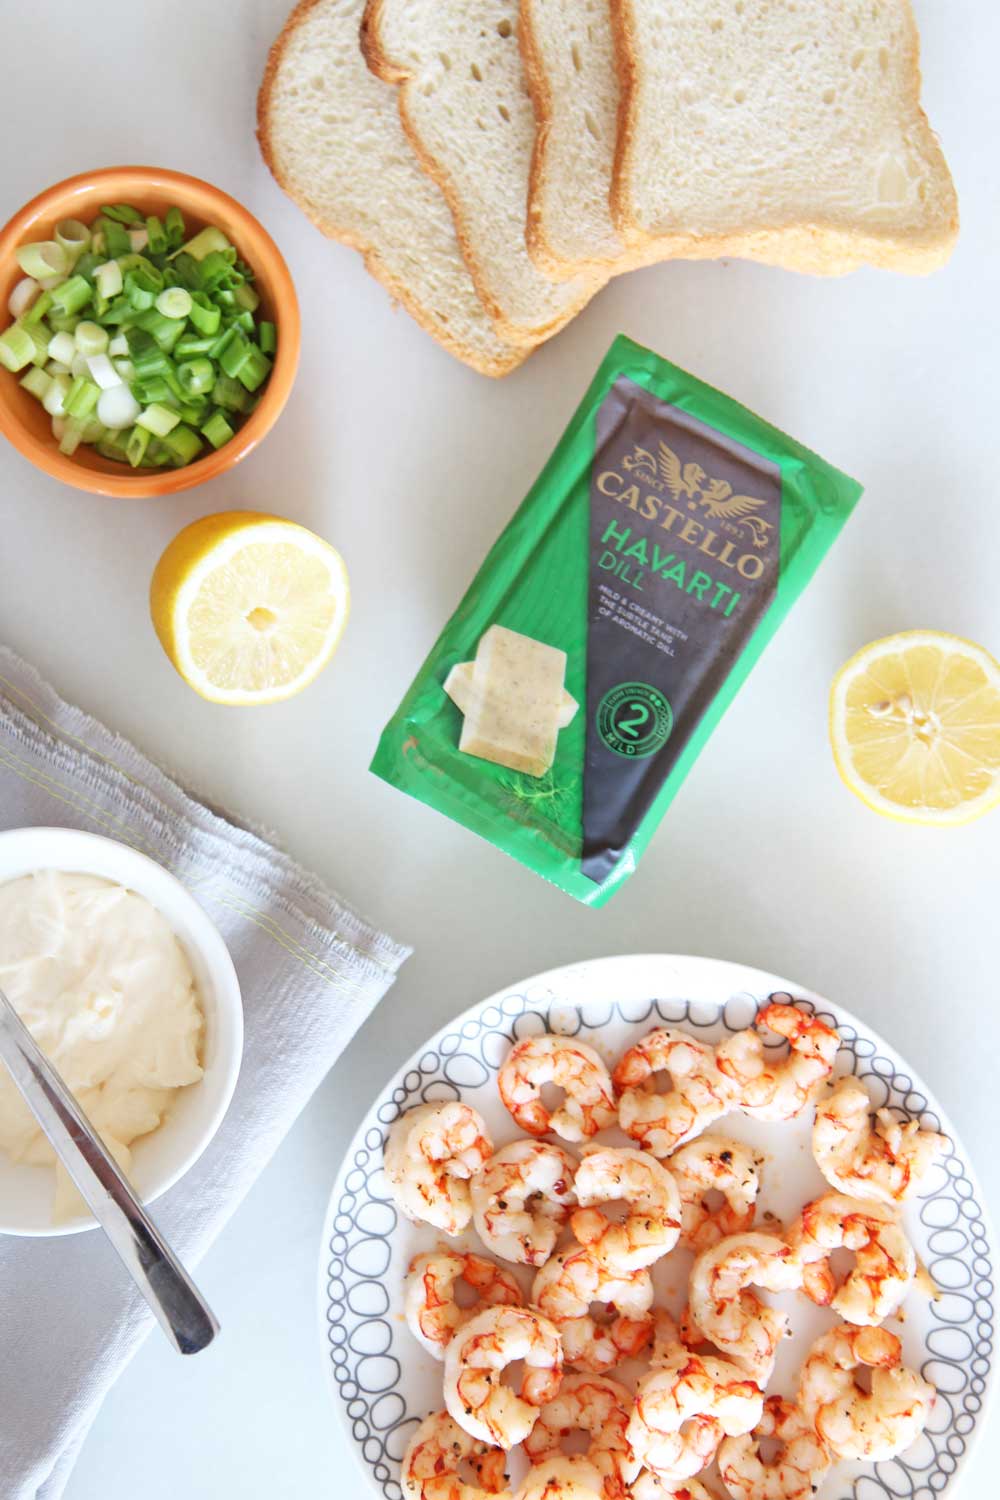 Shrimp and Dill Havarti Grilled Cheese Recipe. Bread, Castello Dill Havarti, mayo, lemon and scallions are all you need. This is a fast crunchy cheesy comfort food delight for a happy dinner. Happy Grilled Cheese Eating! www.ChopHappy.com #Ad #CastelloCheese #GrilledCheese